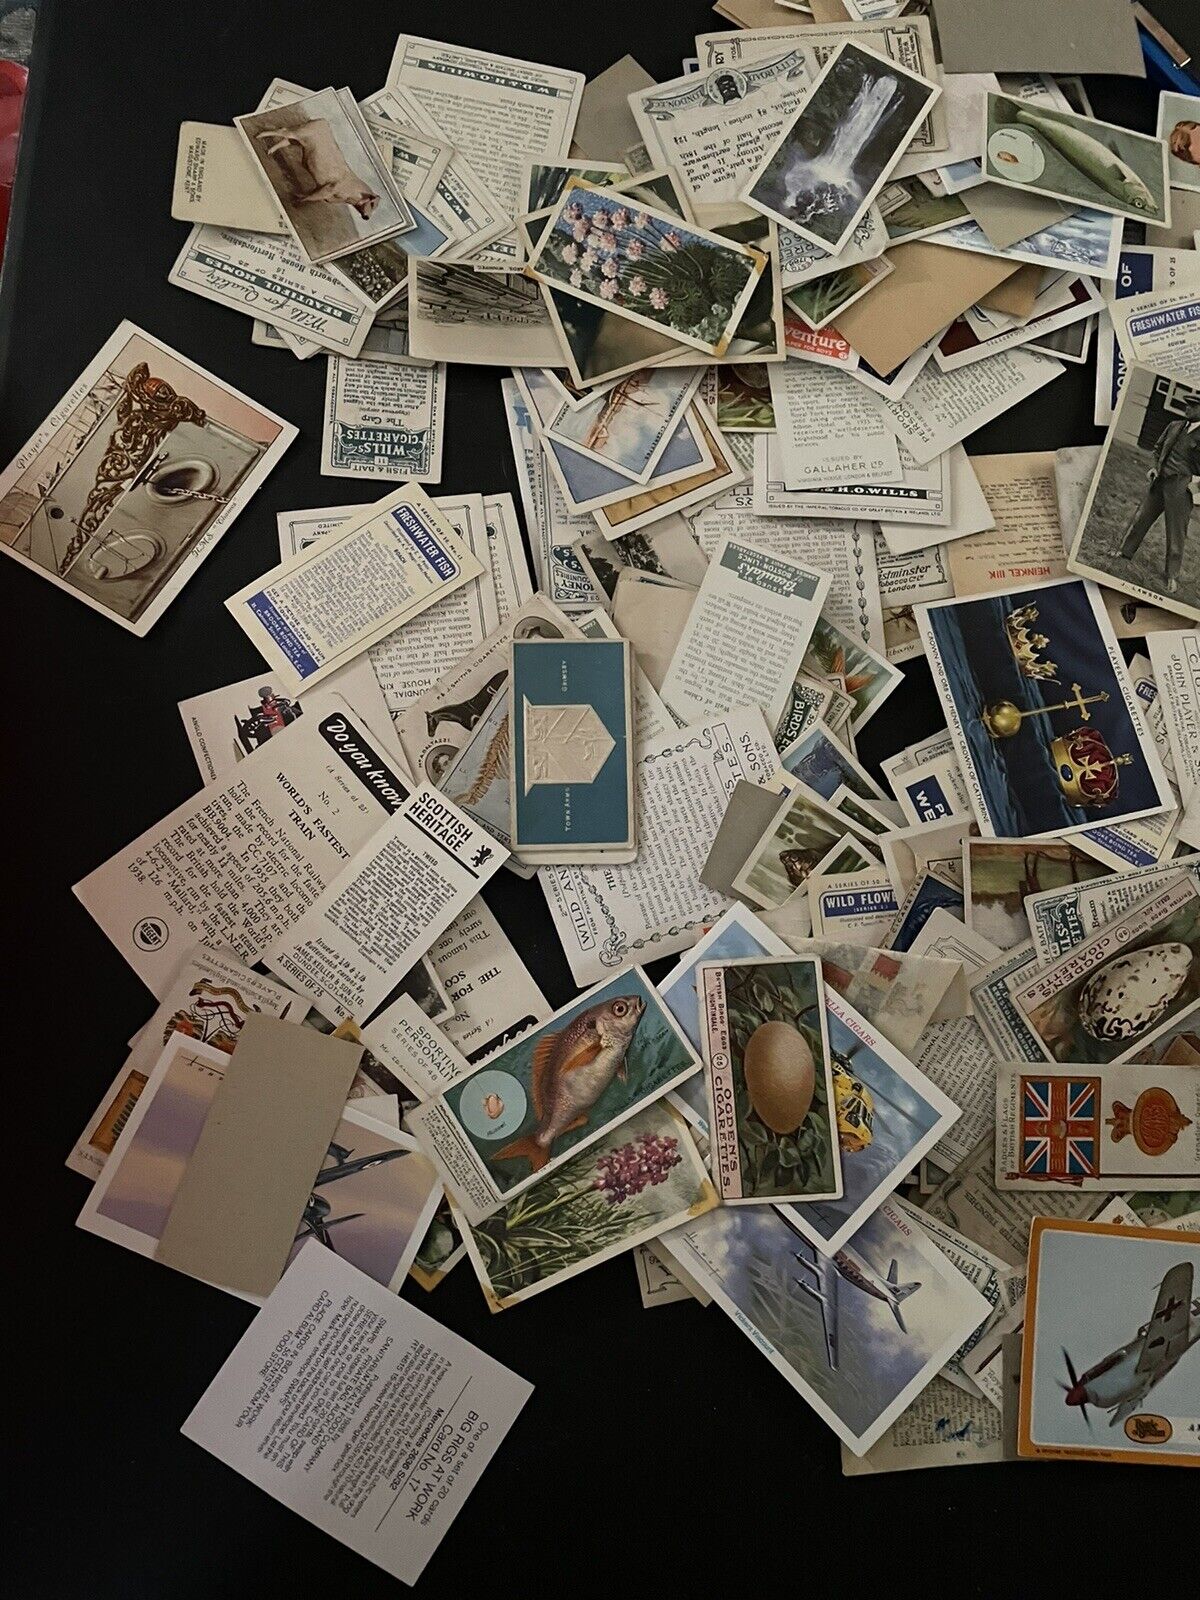 lot of 100 x Old tobacco/cigarette cards Like Seen In This Photo Giant Lot